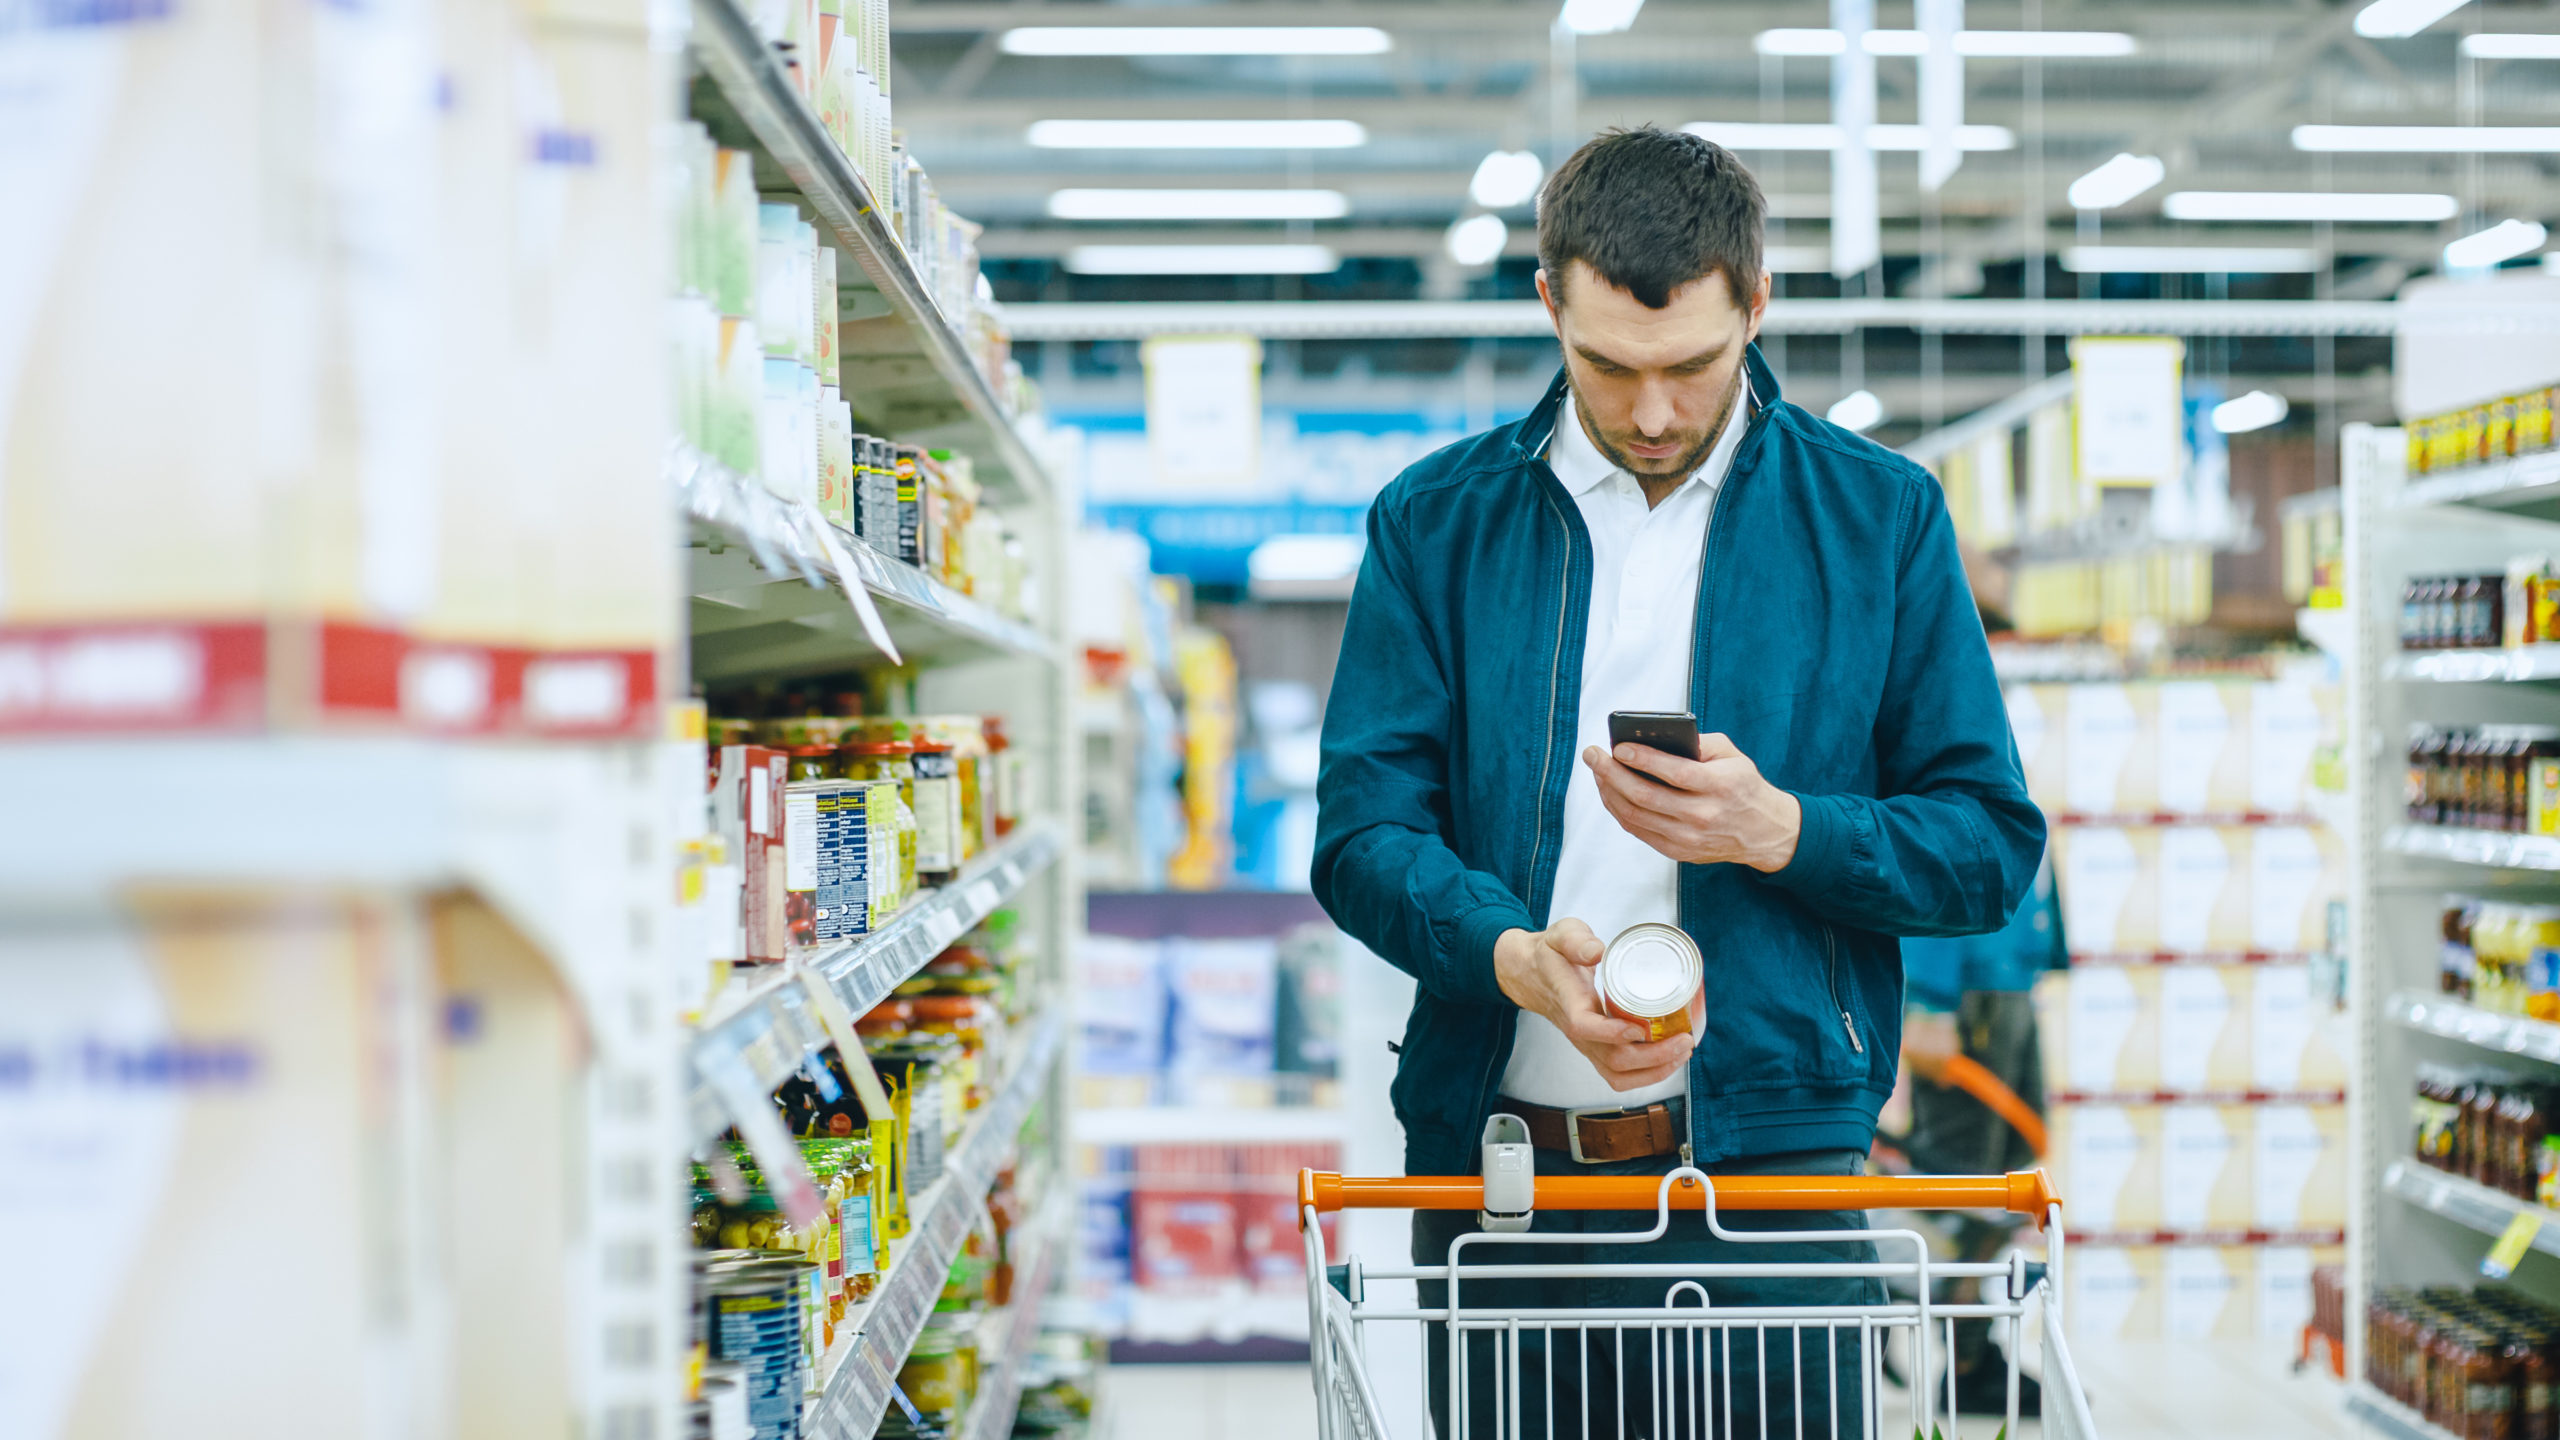 At the Supermarket: Handsome Man Uses Smartphone and Takes Picture of the Can of Goods. He's Standing with Shopping Cart in Canned Goods Section.